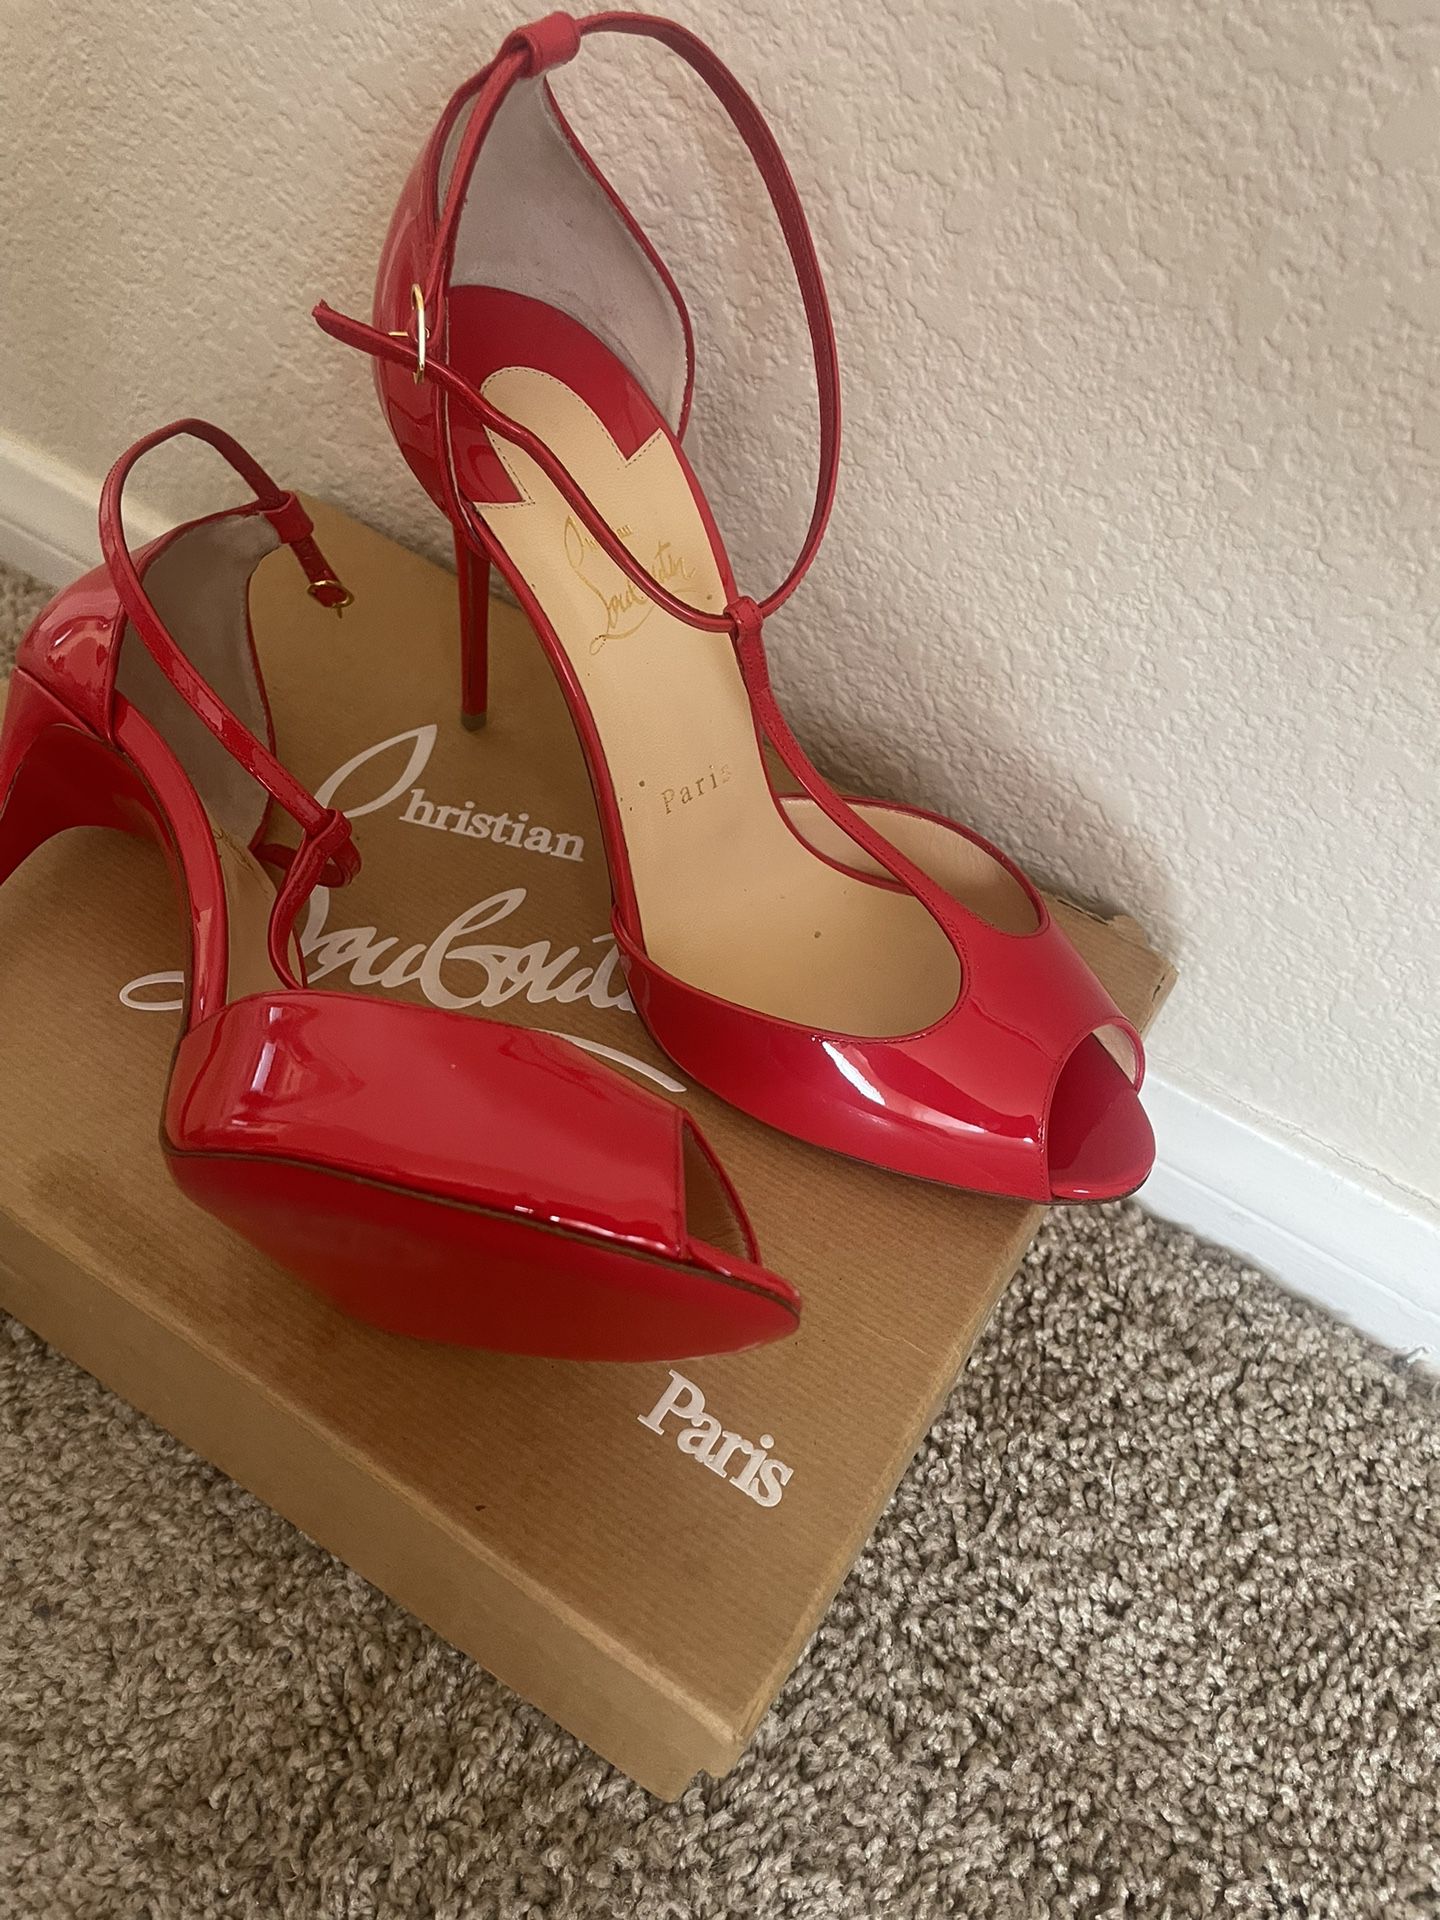 christian louboutin (Red Bottoms)